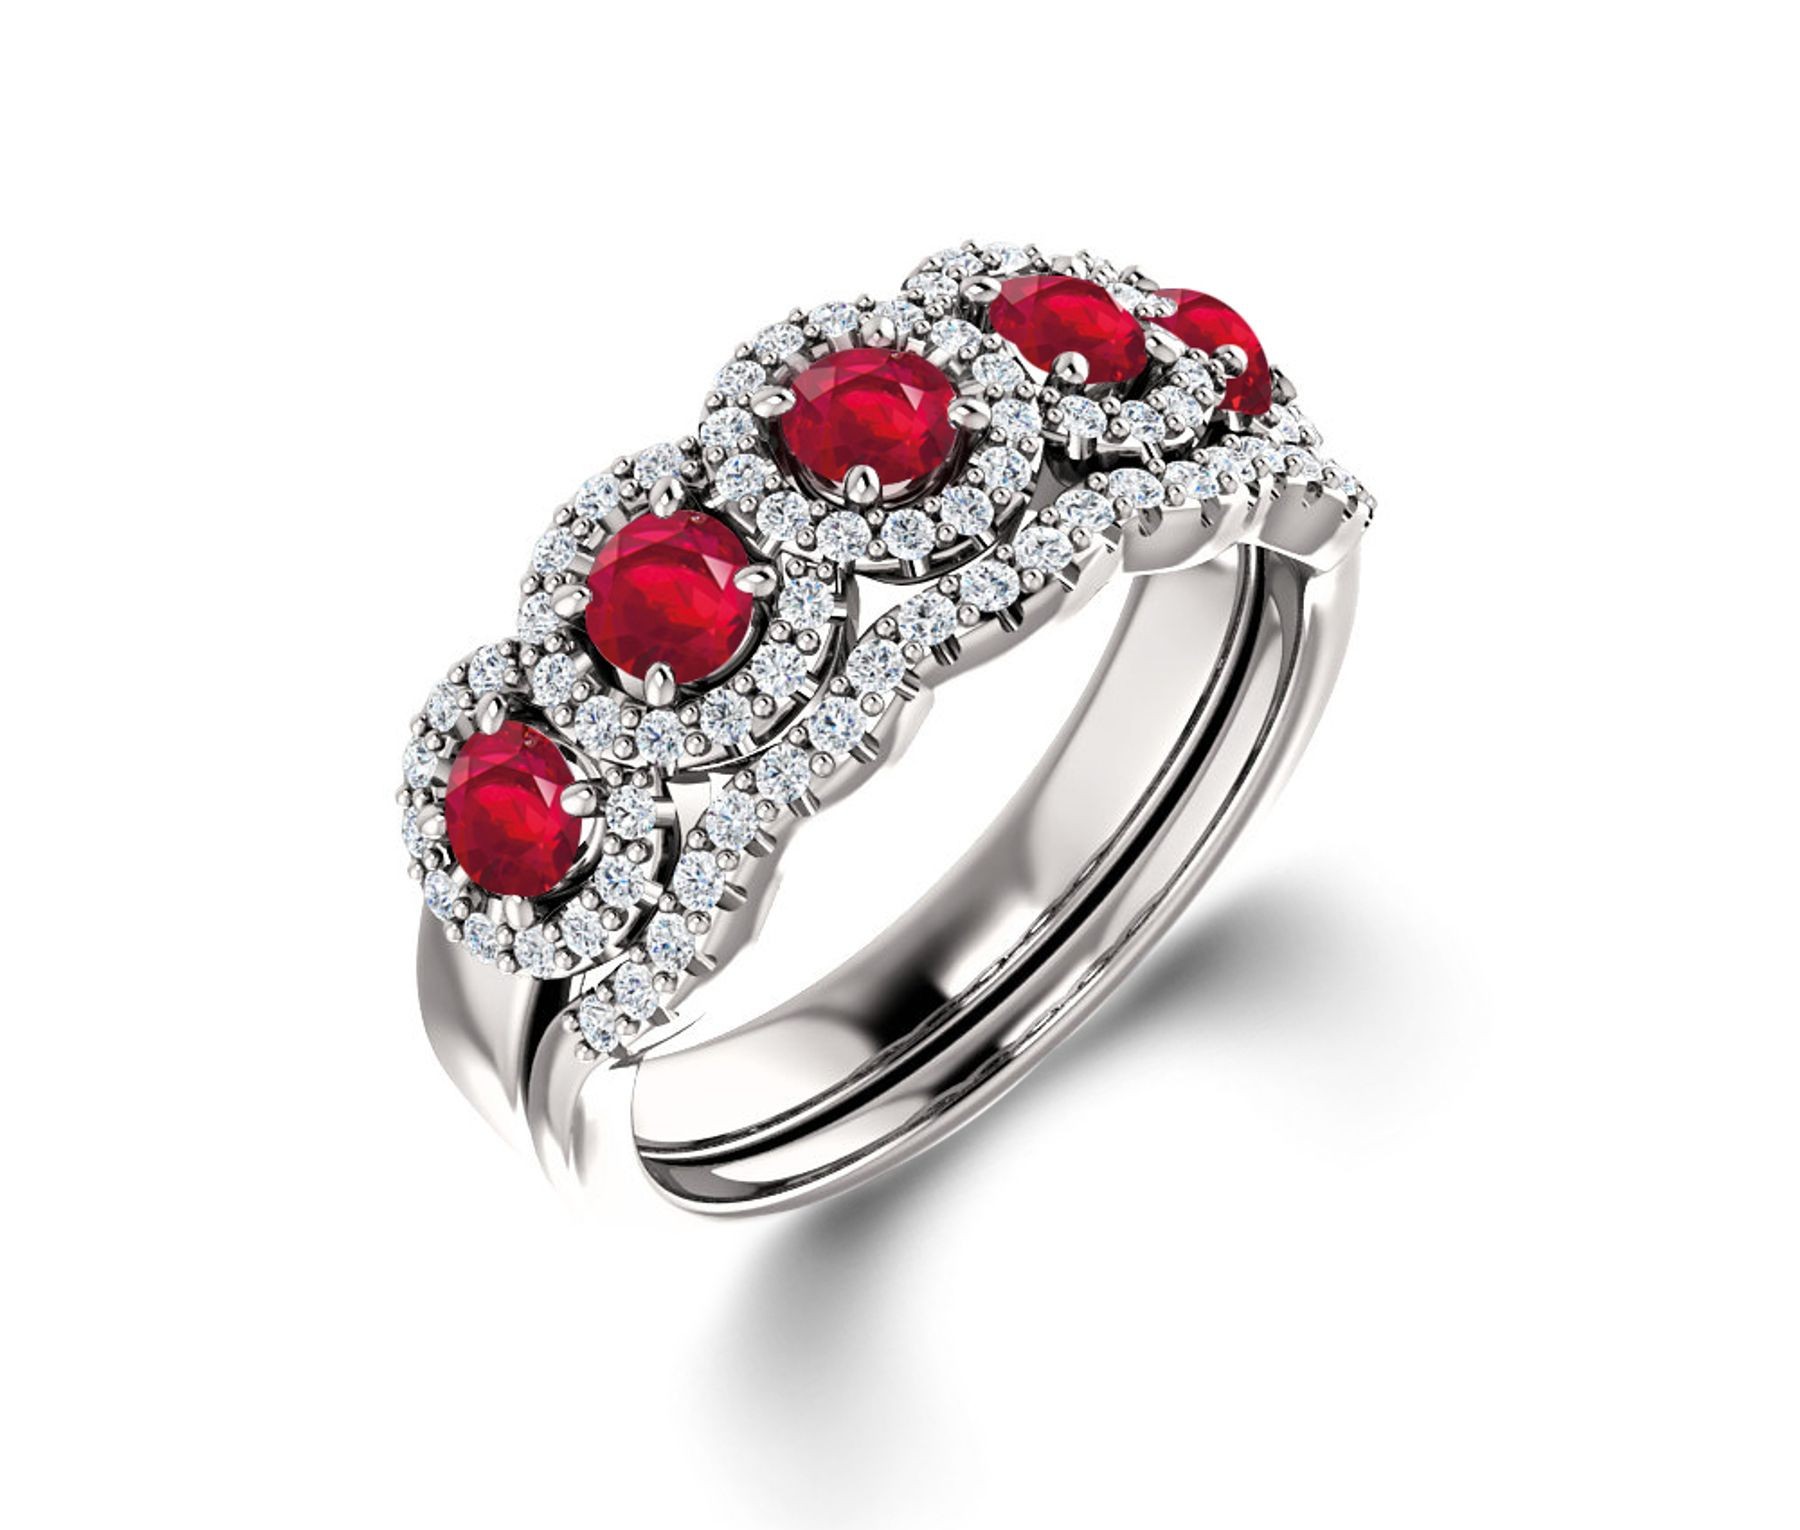 Delicate Micro Pave Halo 5 Stone Ruby and Sparkling Diamond Engagement Rings